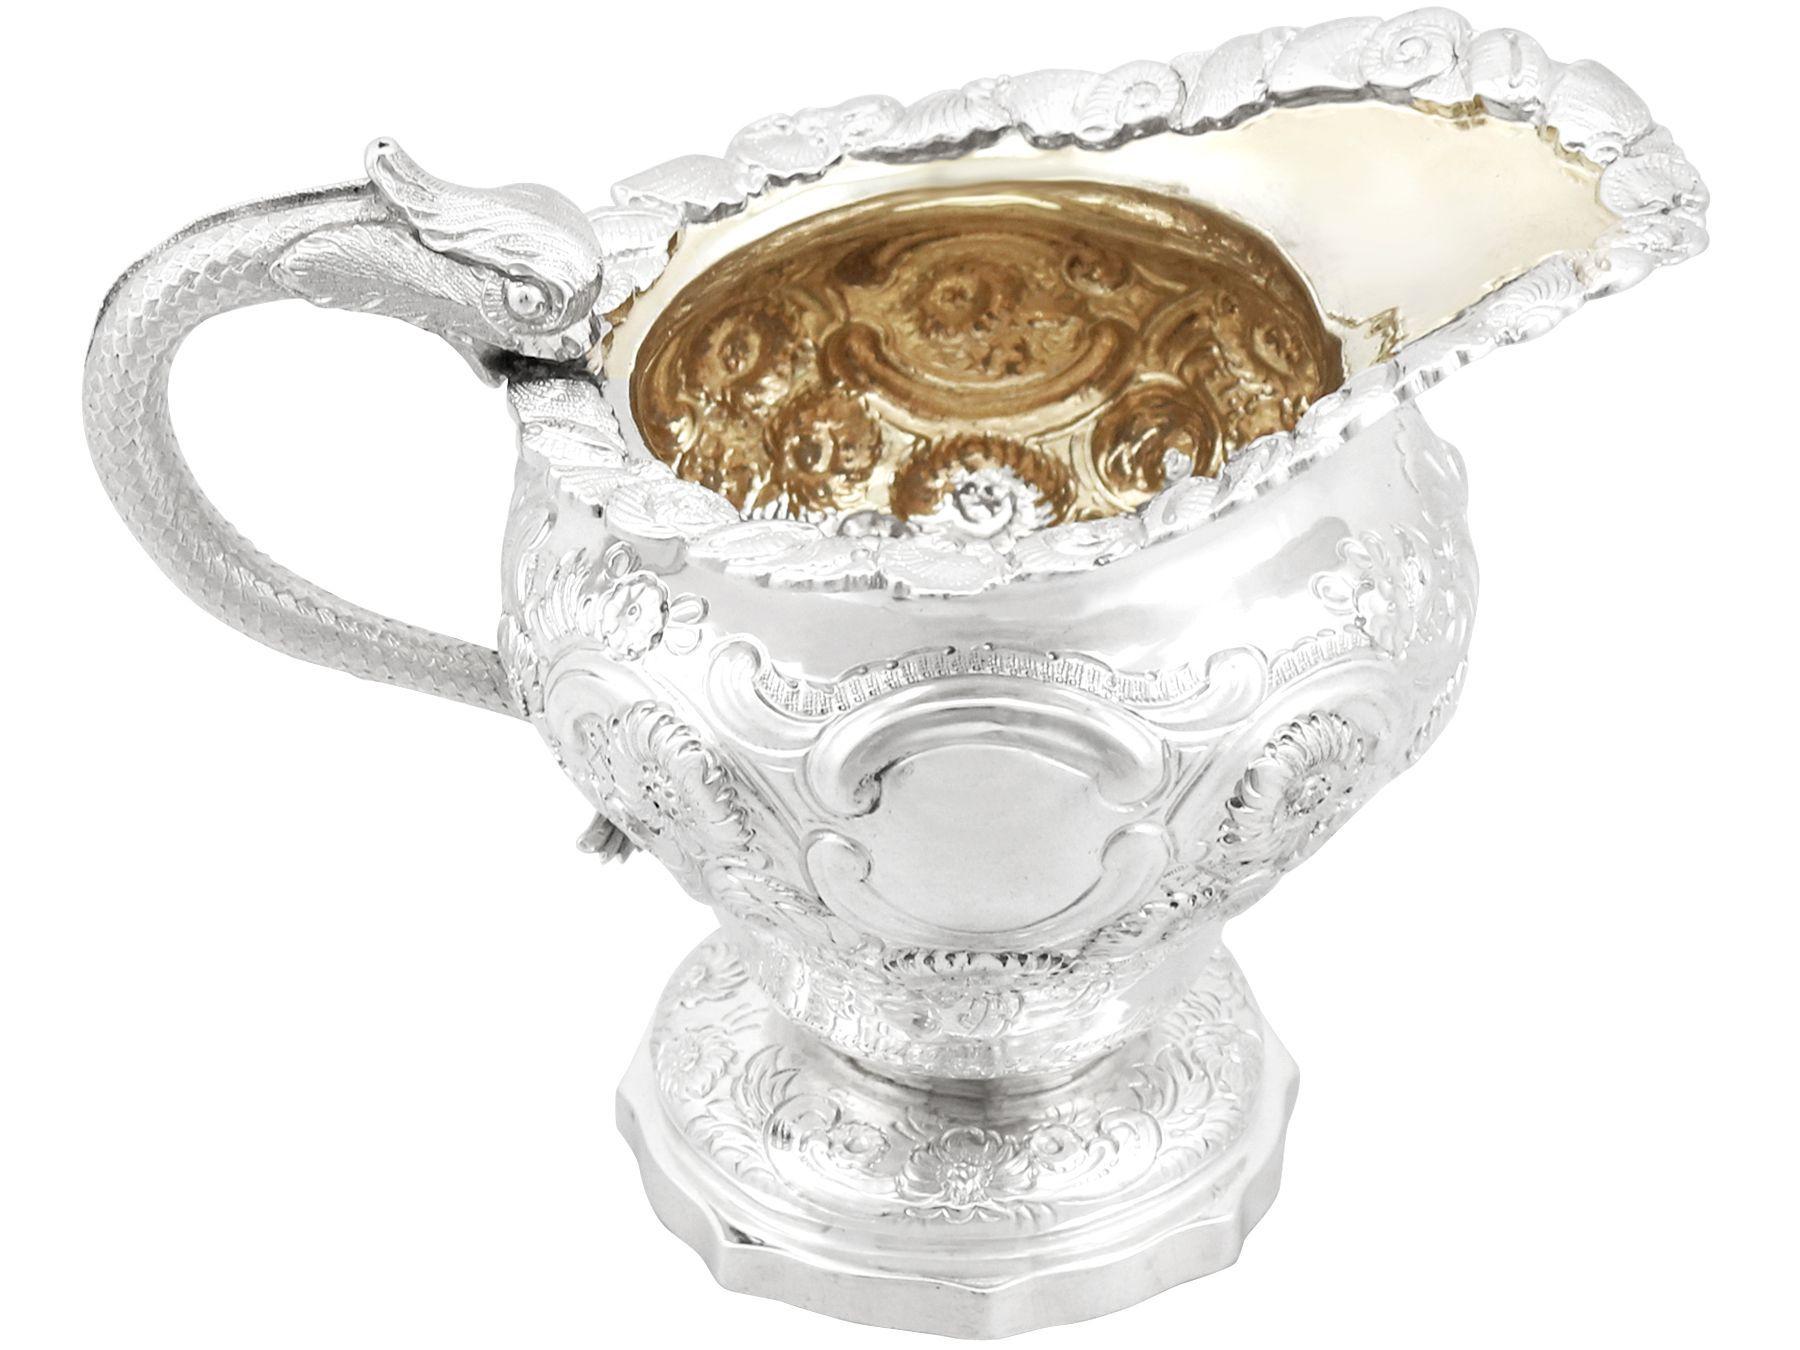 An exceptional, fine and impressive, antique William IV English sterling silver cream jug; an addition to our silver teaware collection.

This exceptional antique sterling silver cream jug has an baluster shaped form onto a domed pedestal and an